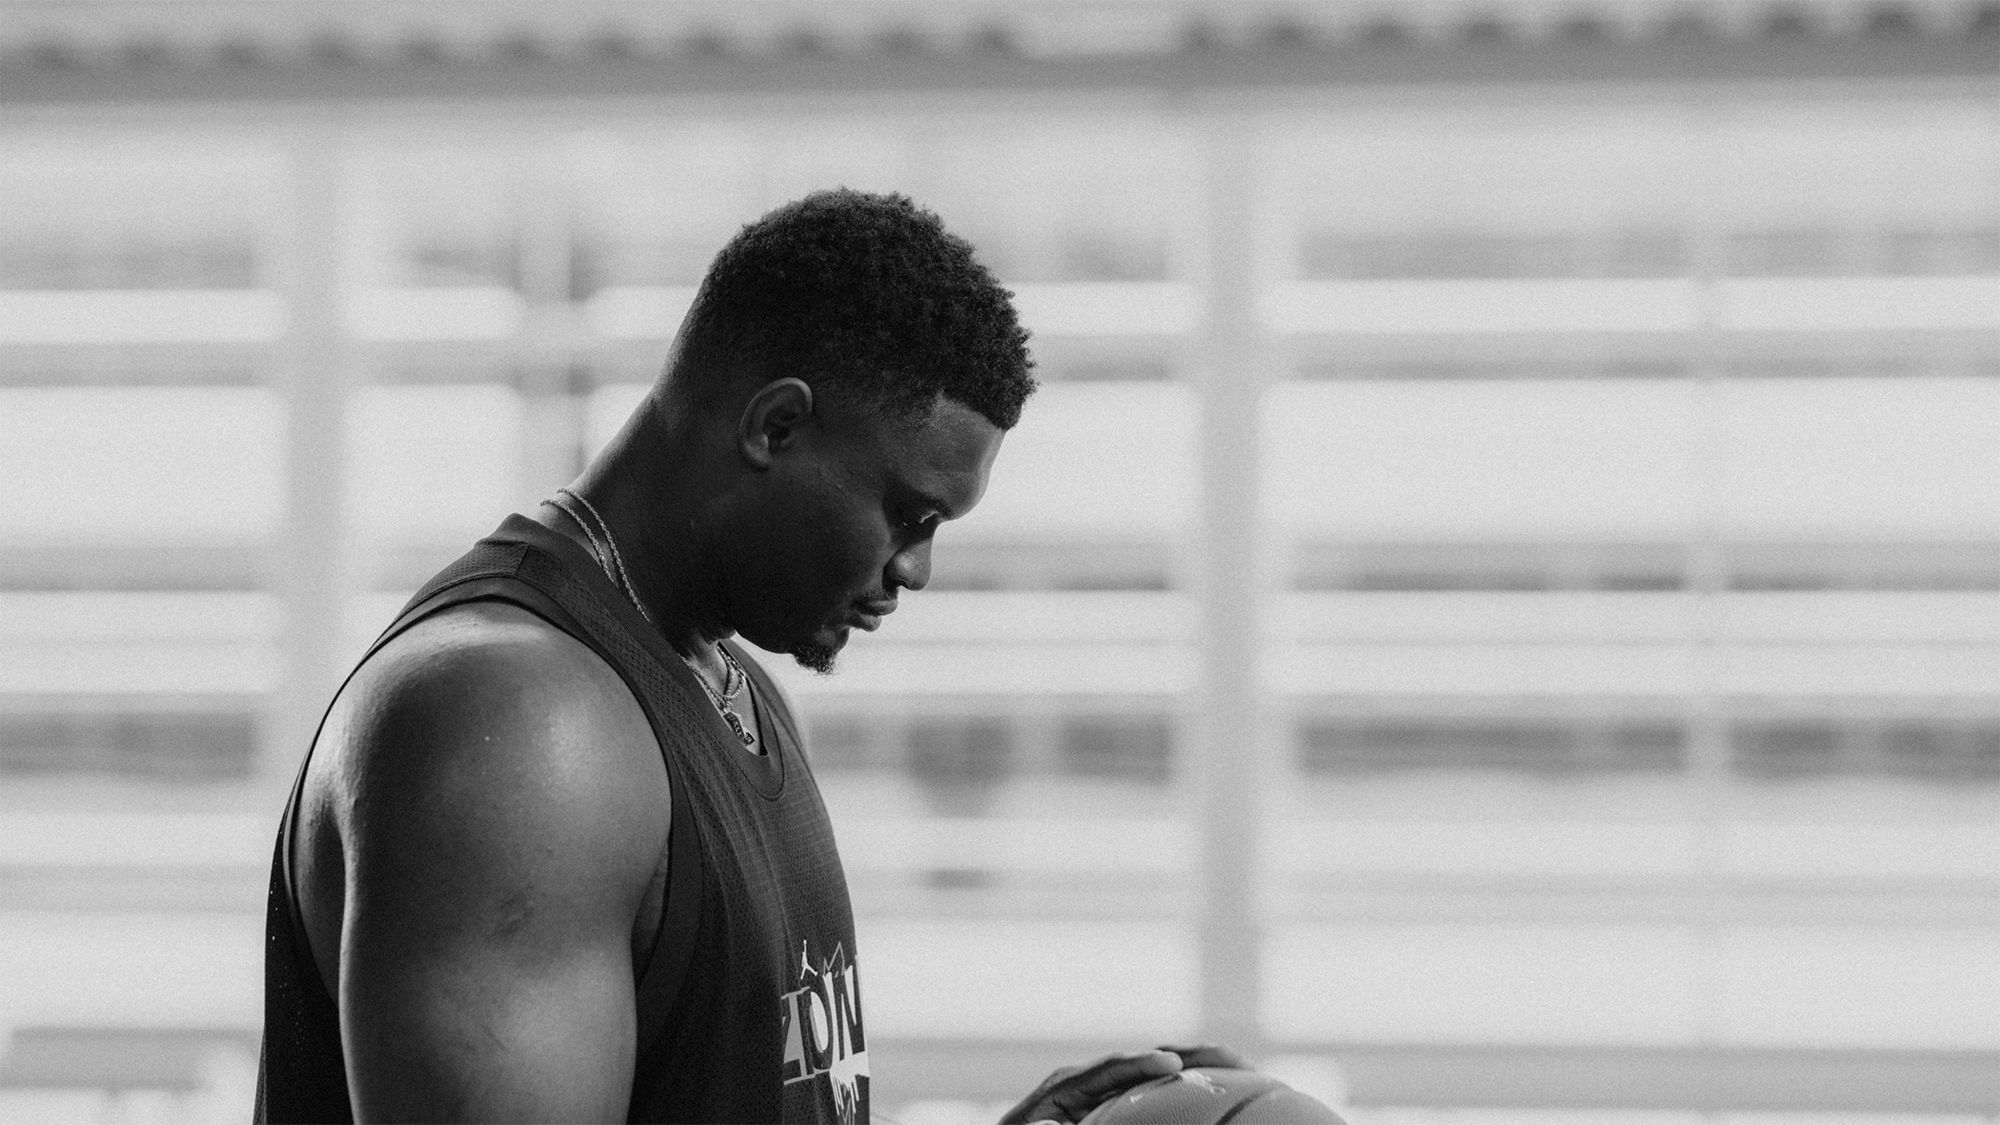 Black and White side view of Zion Williamson holding basketball looking down with eyes closed